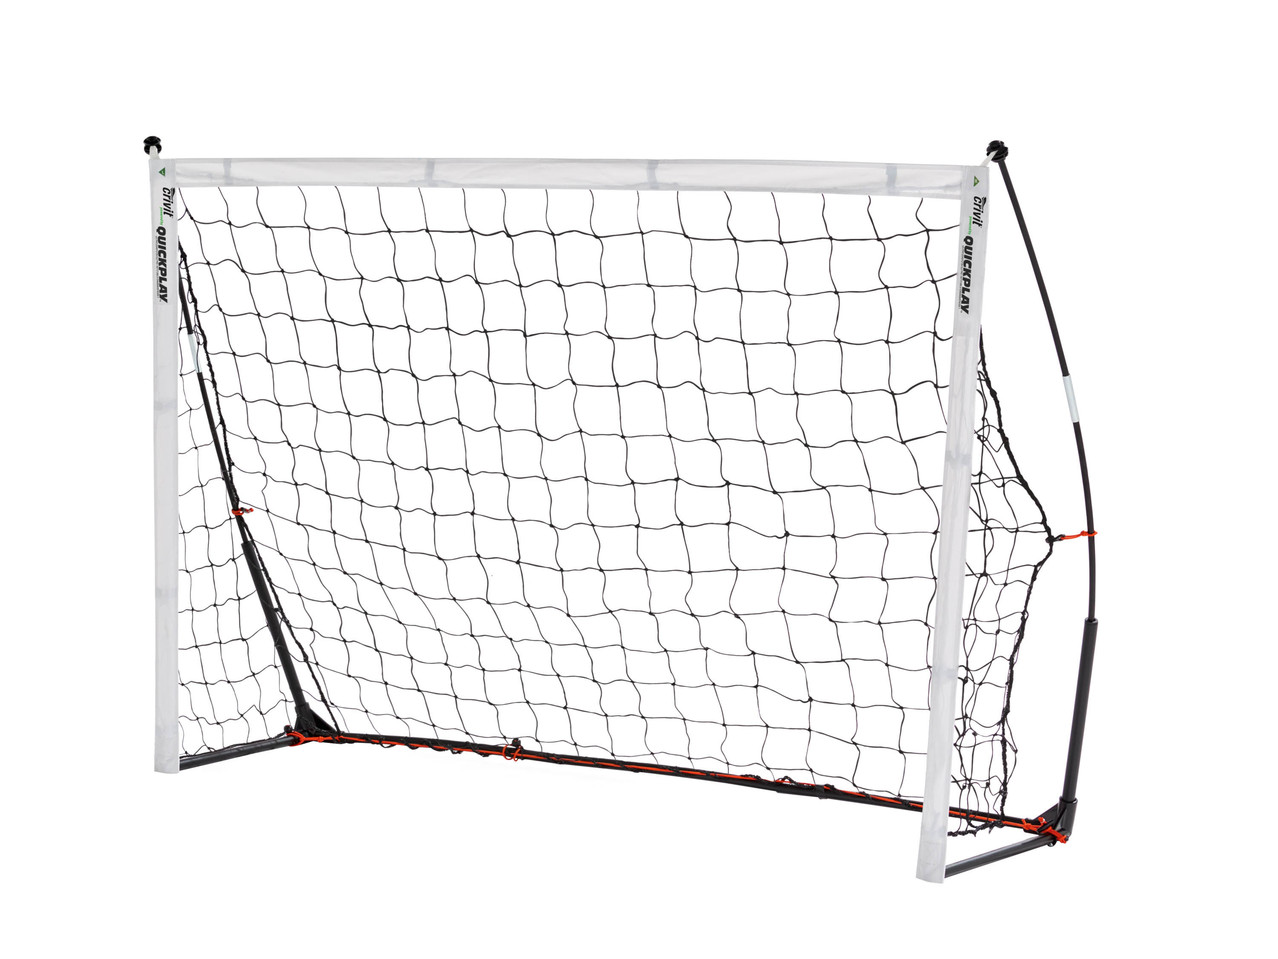 2-IN-1:PORTABLE POP-UP GOAL WITH REBOUND NET